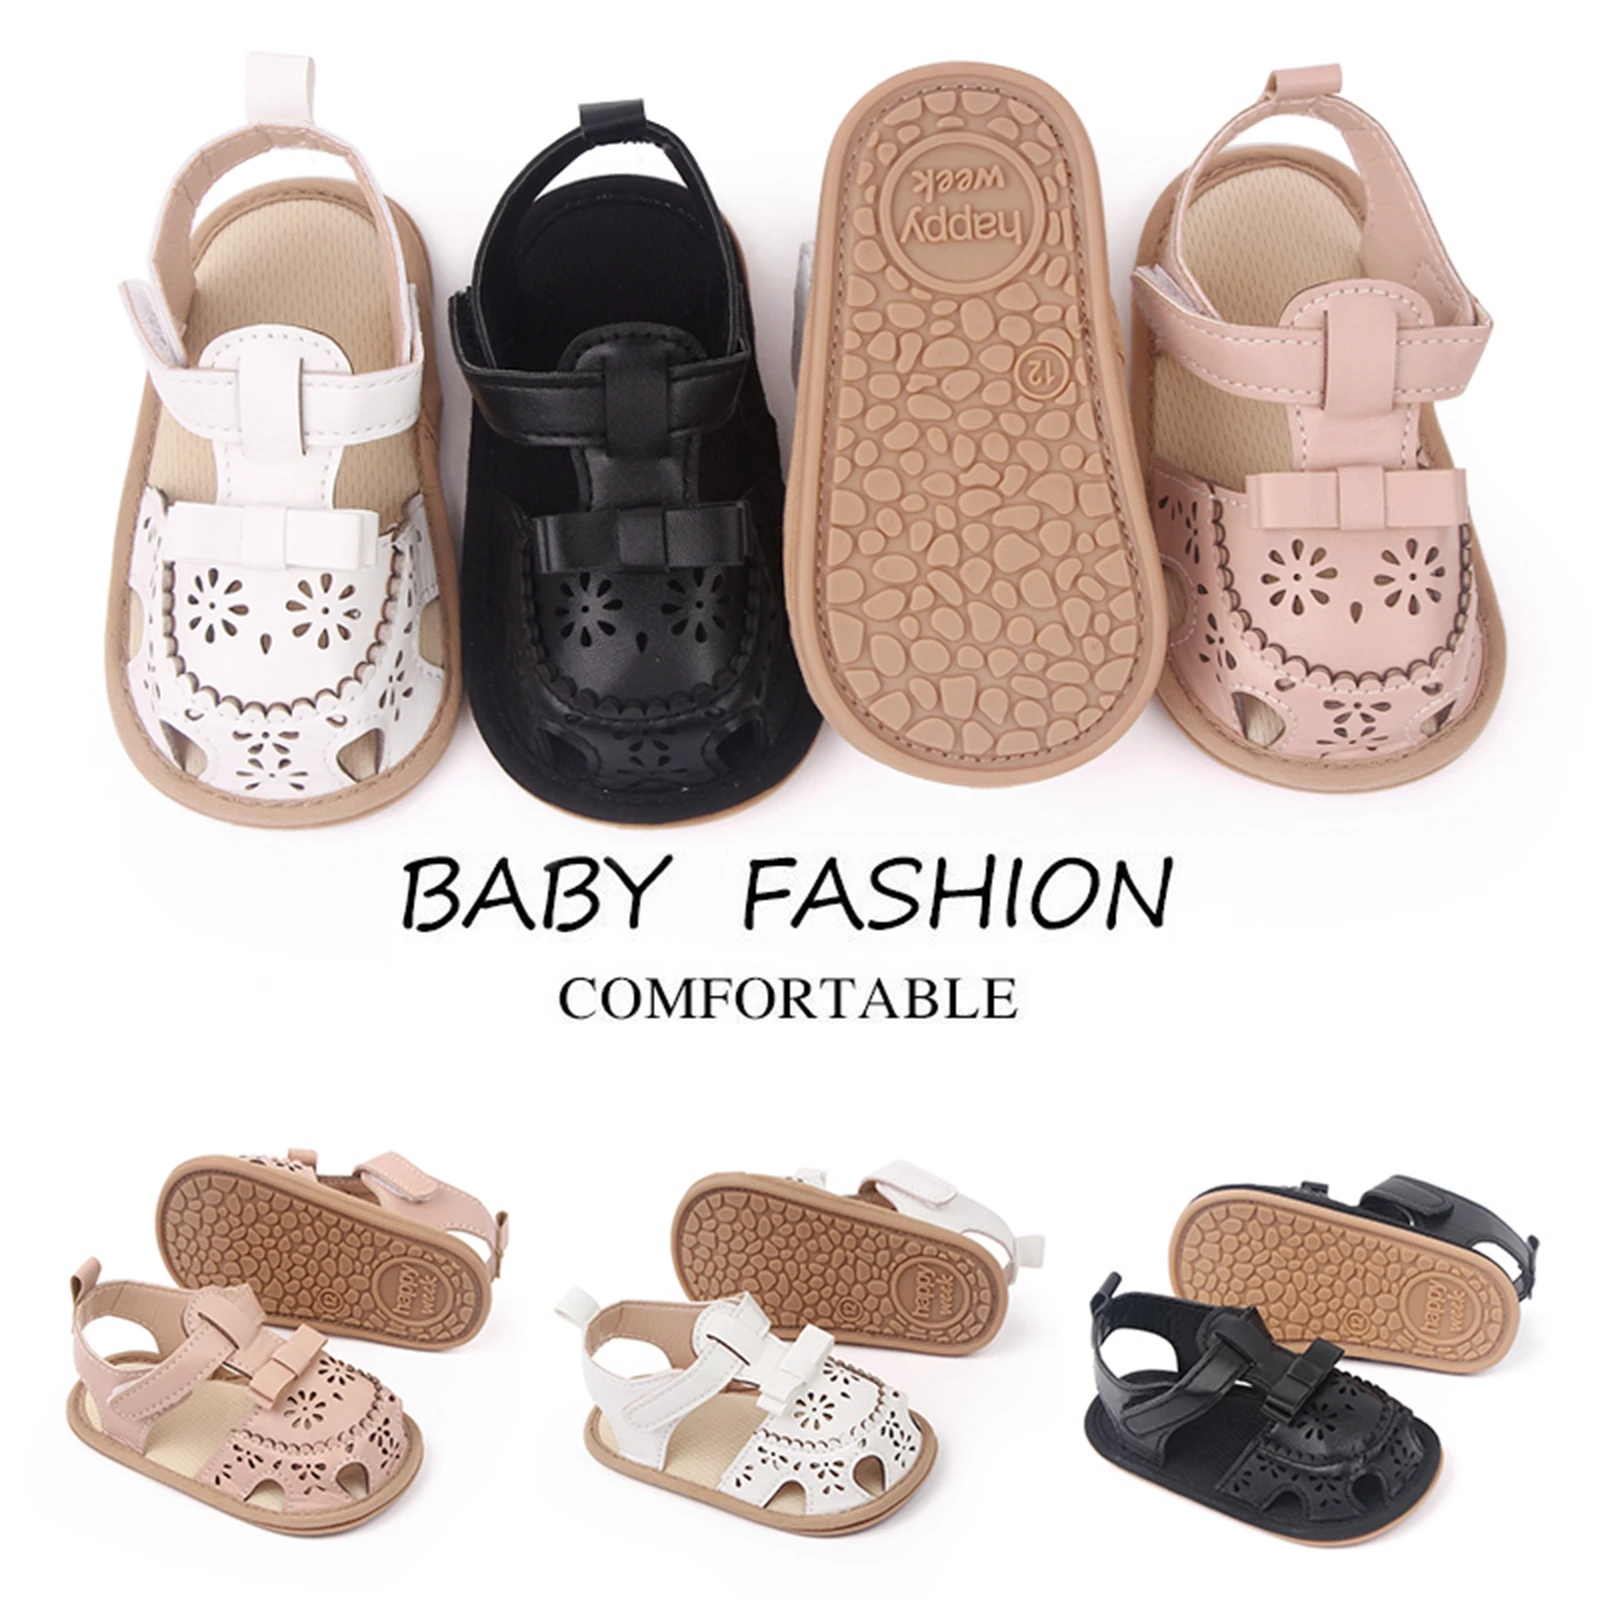 

Infant Baby Girls Boys Sandal PU Leather Flexible Non-slip Hollowed Summer Flat Shoes for Casual Daily 0-18Months